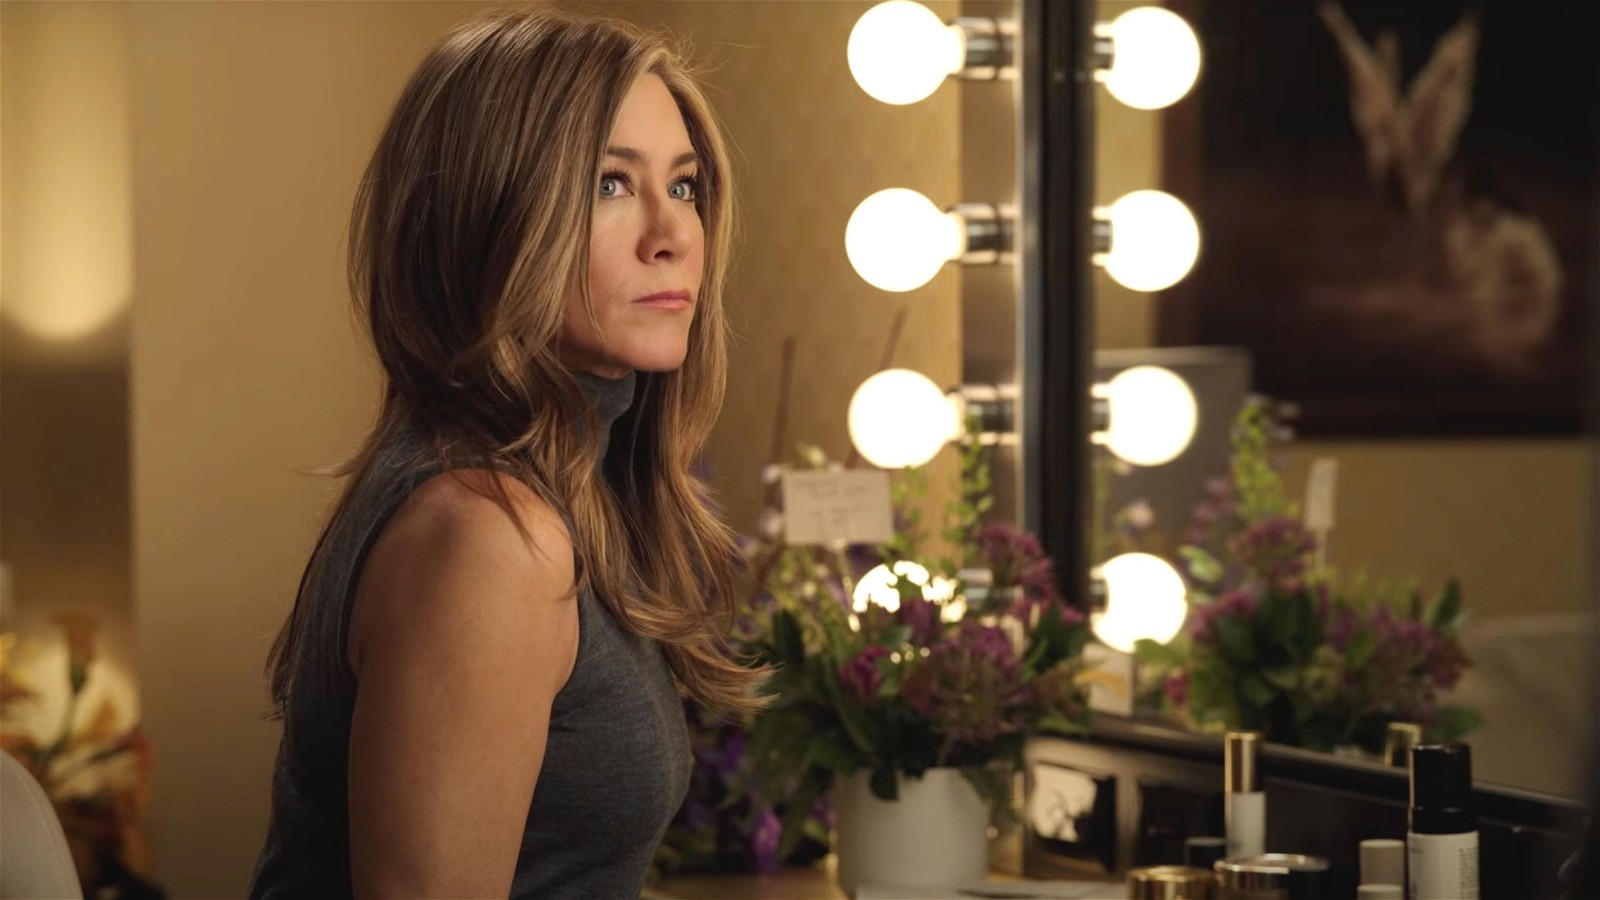 The Morning Show actress Jennifer Aniston will open up about her IVF journey and her plastic surgery procedures in her memoir 